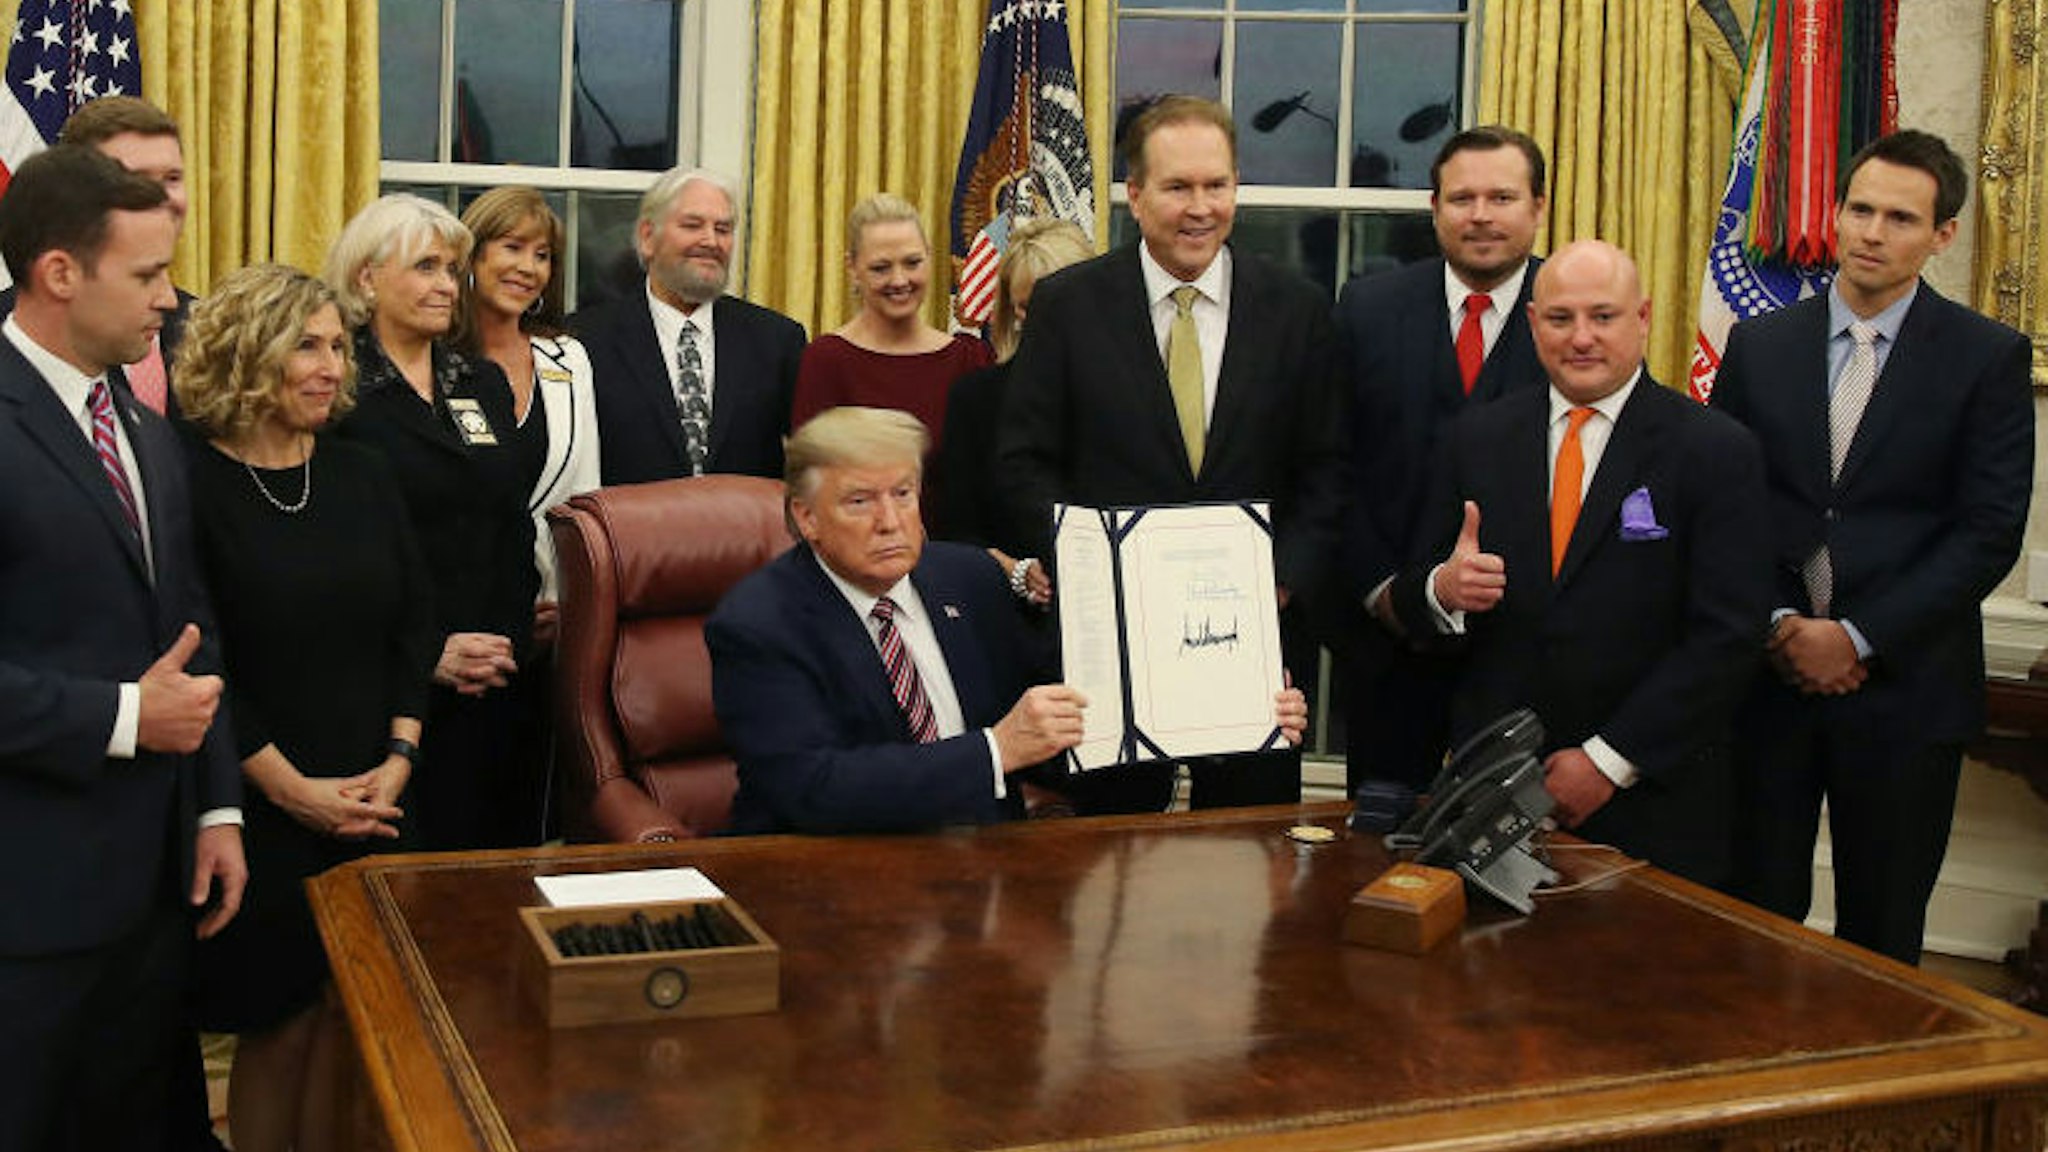 U.S. President Donald Trump poses with animal rights supporters after signing H.R. 724, the Preventing Animal Cruelty and Torture Act, in the Oval Office at the White House on November 25, 2019 in Washington, DC. (Photo by Mark Wilson/Getty Images)